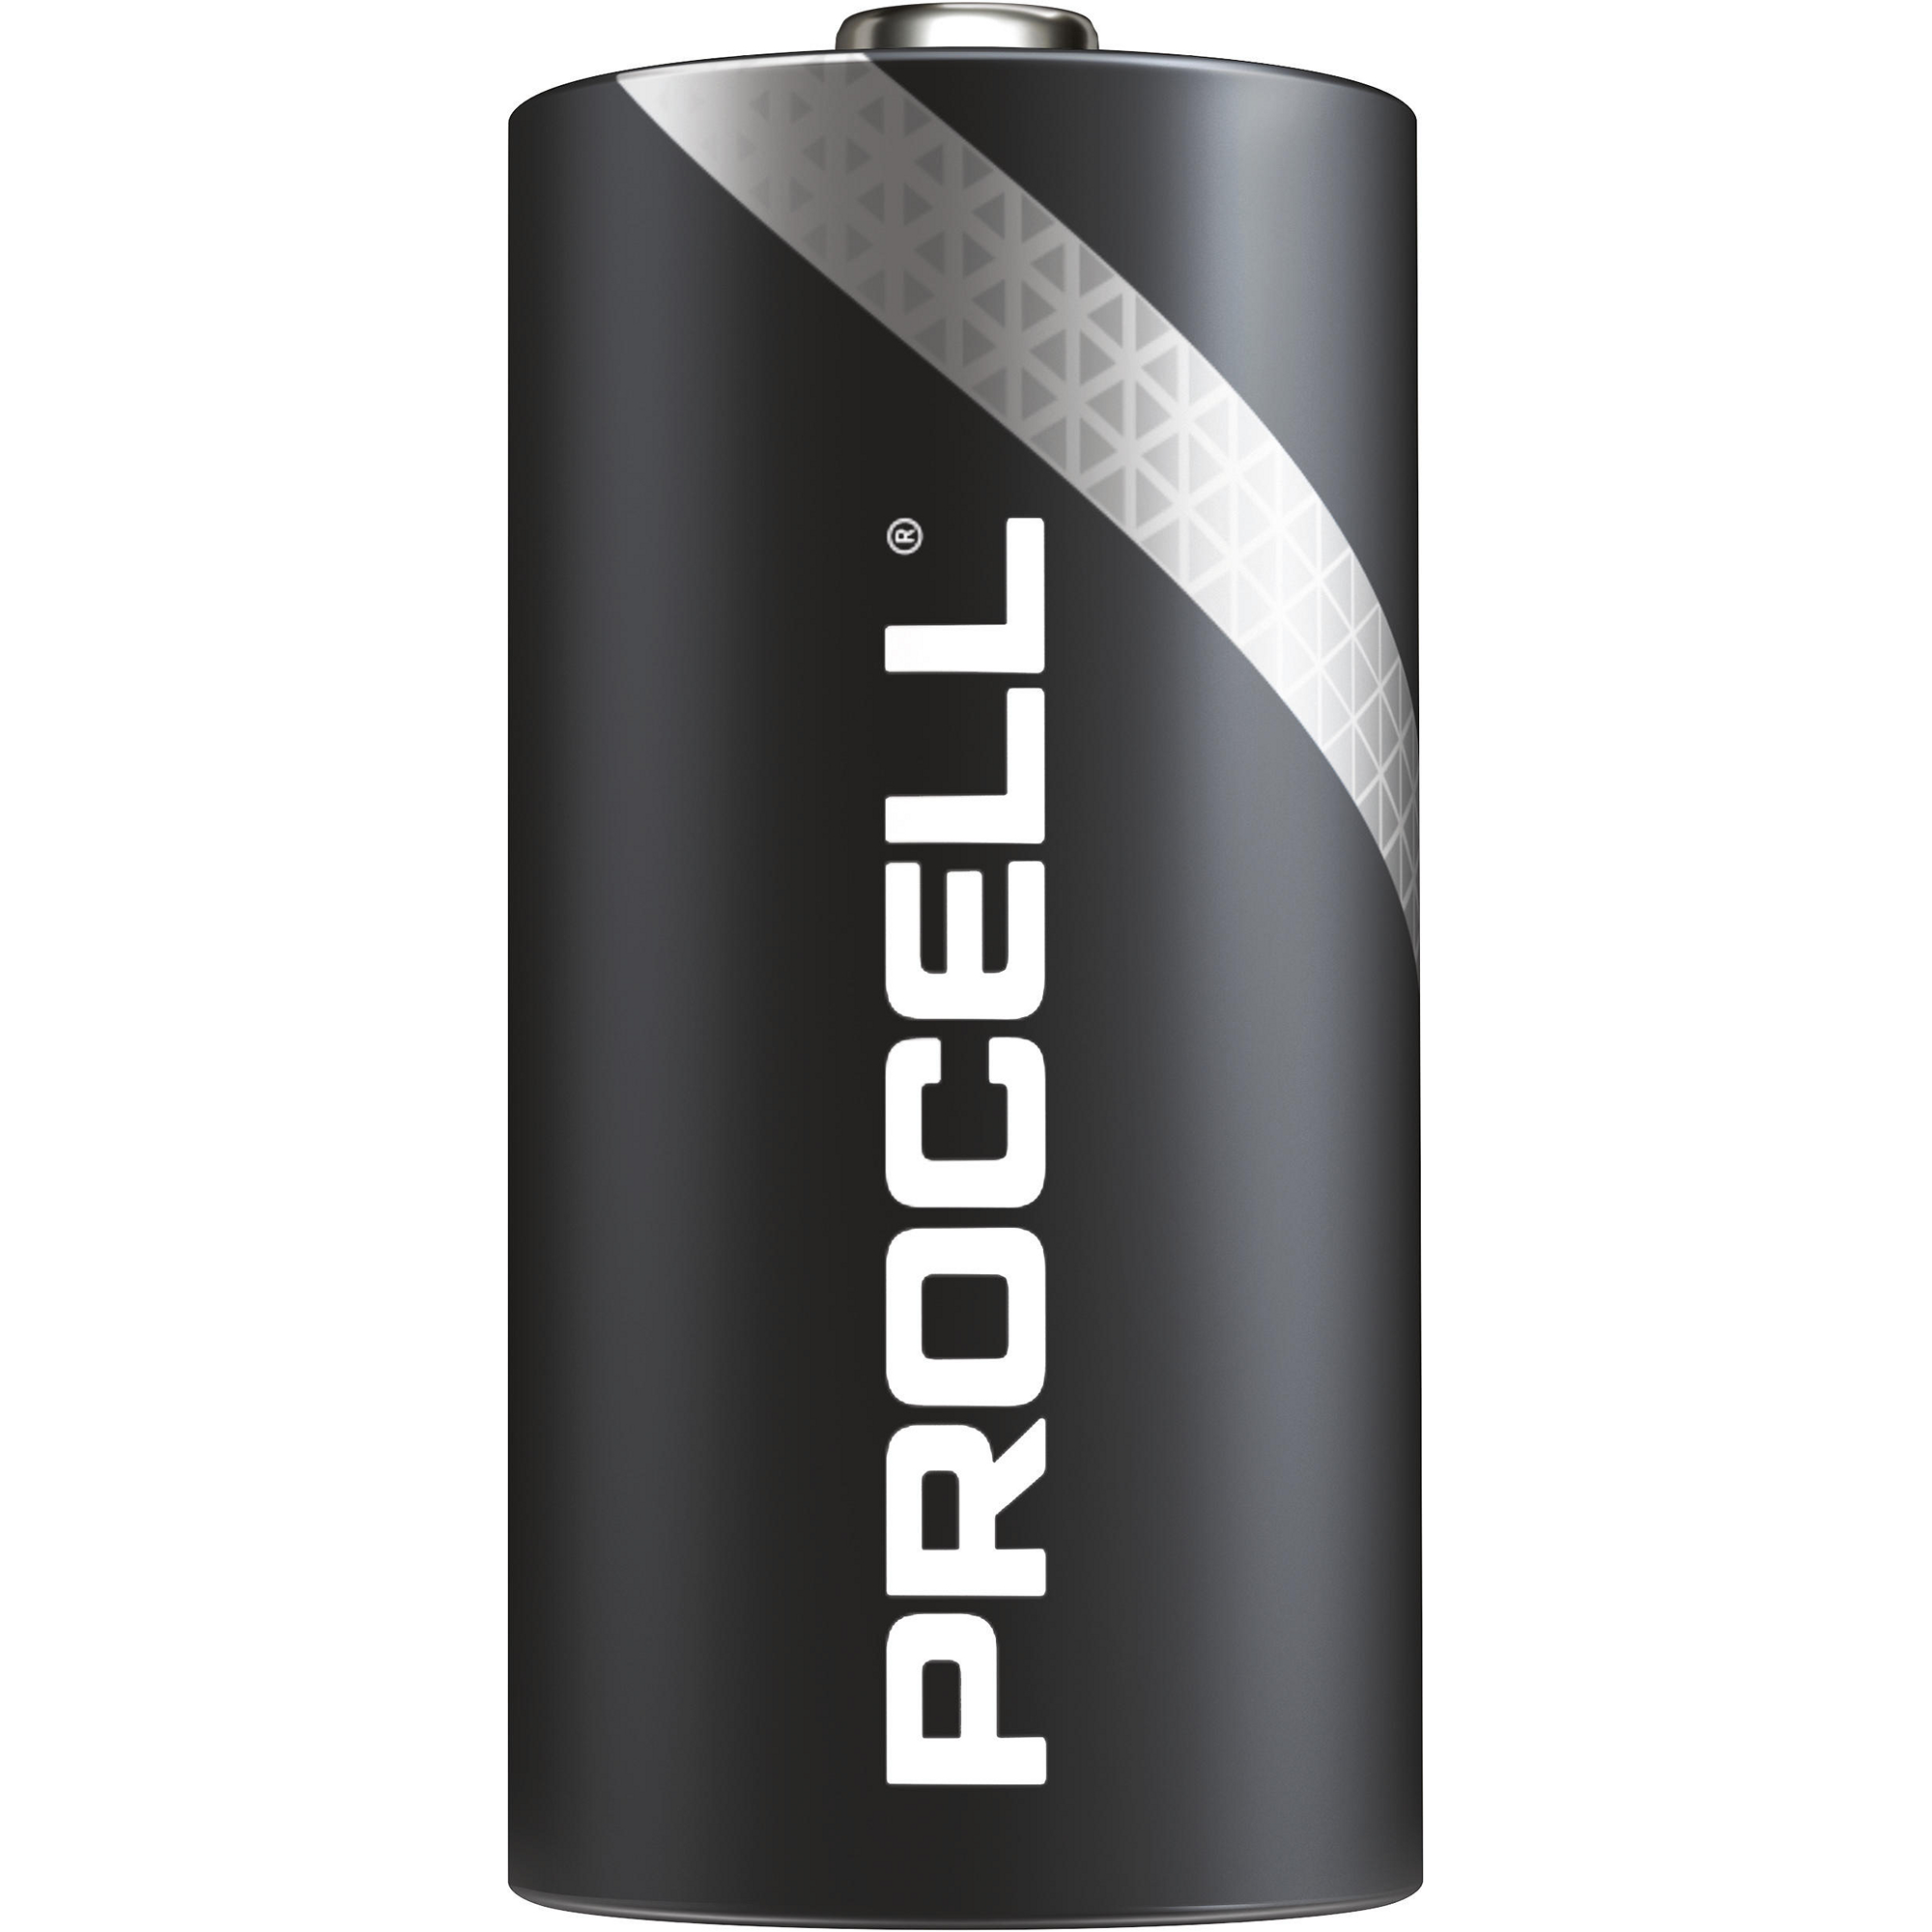 Duracell Procell C Batteries